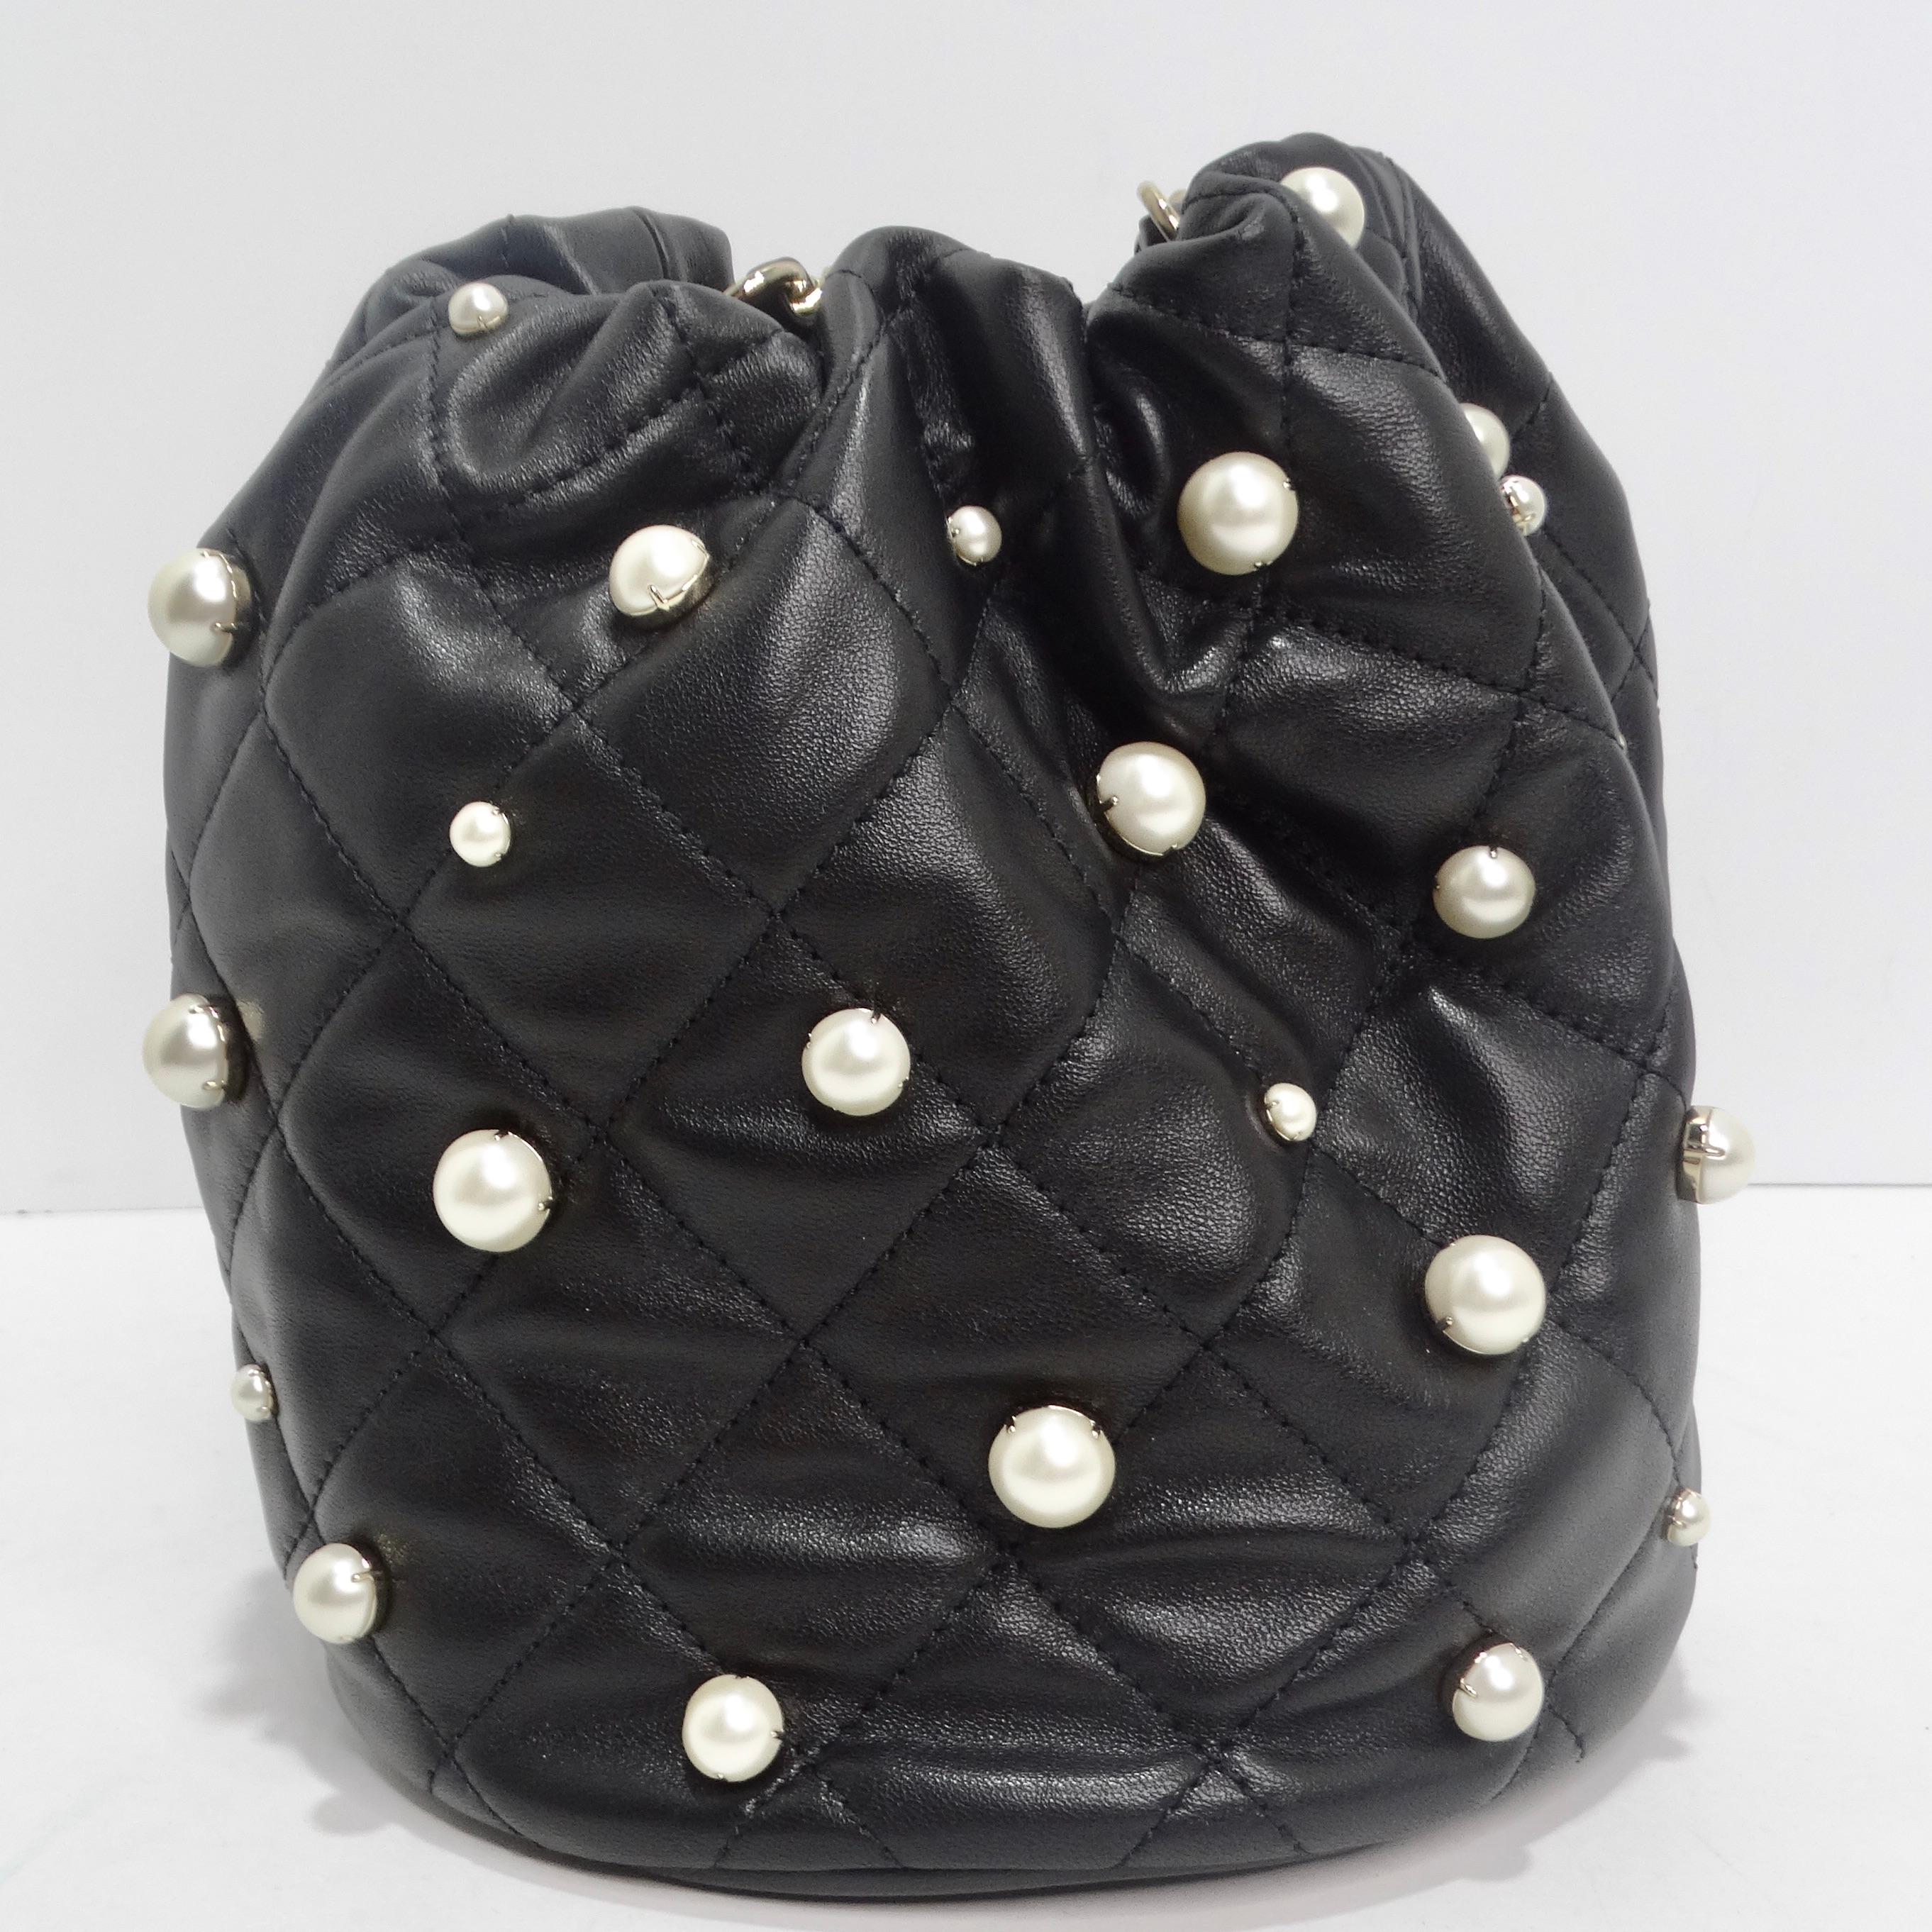 Chanel About Pearls Black Lambskin Drawstring Bucket Bag In Excellent Condition For Sale In Scottsdale, AZ